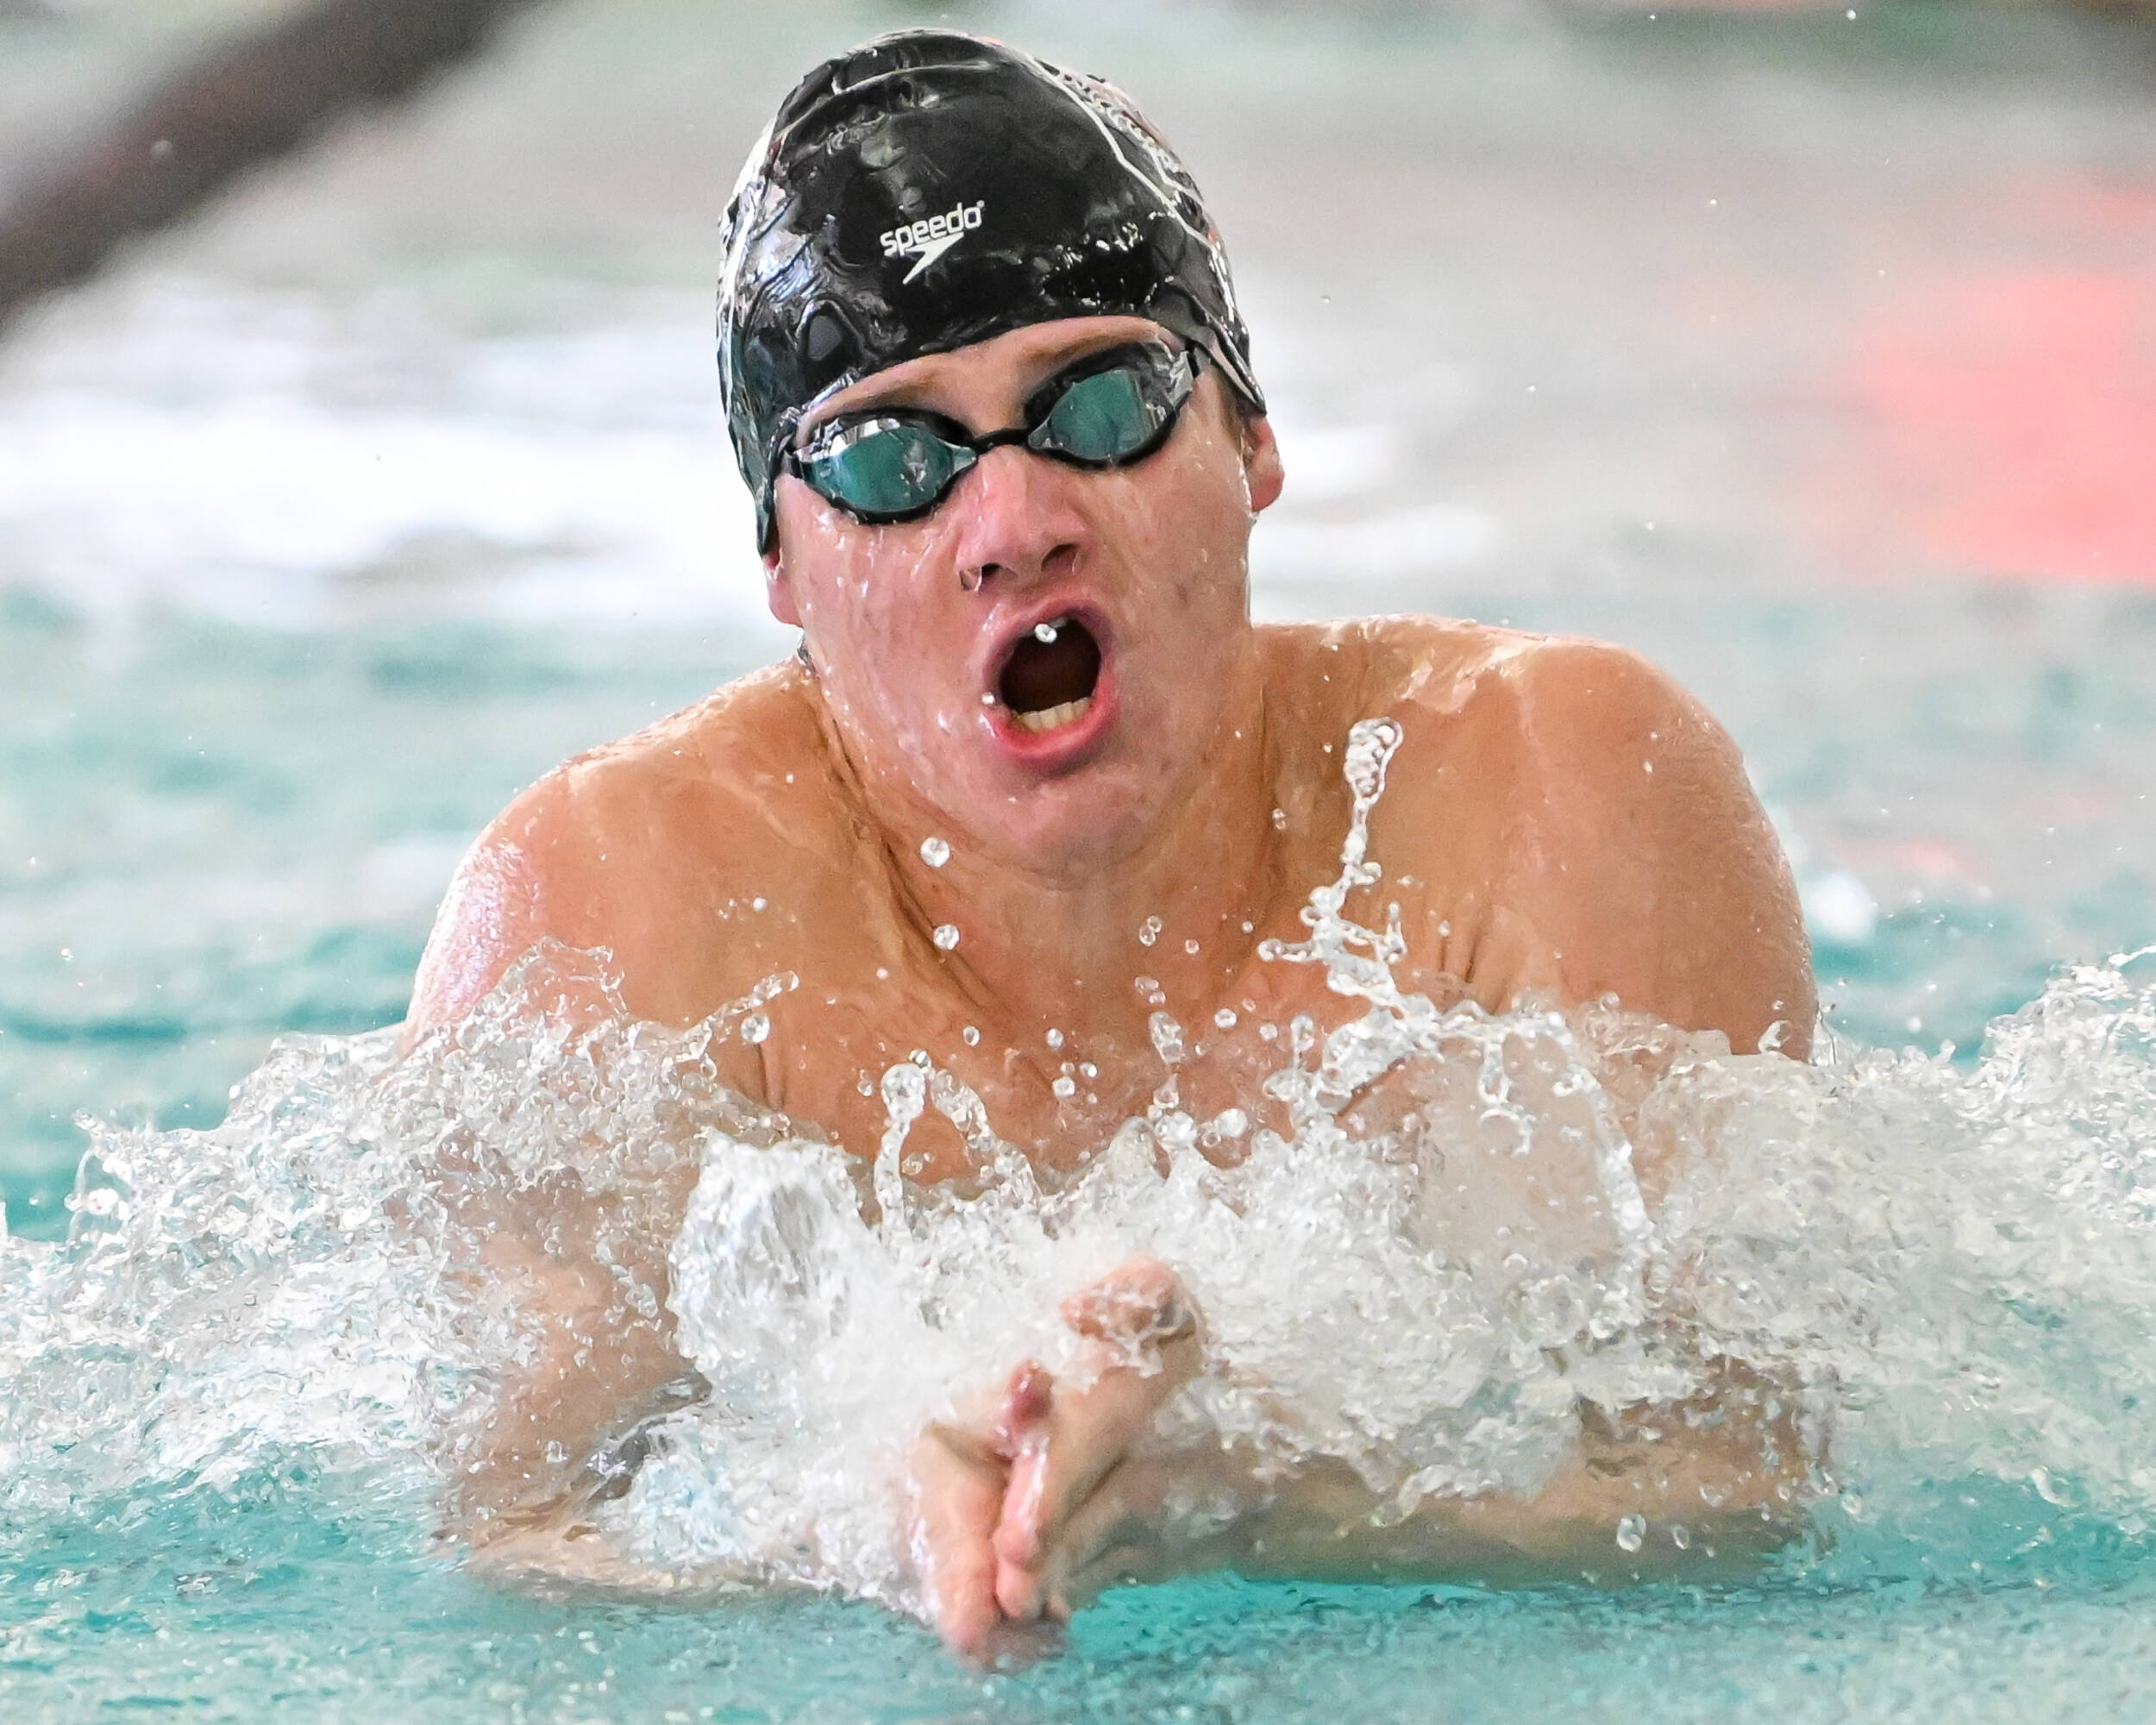 Gamecock Swimmers Set Several PRs at VT Invitational